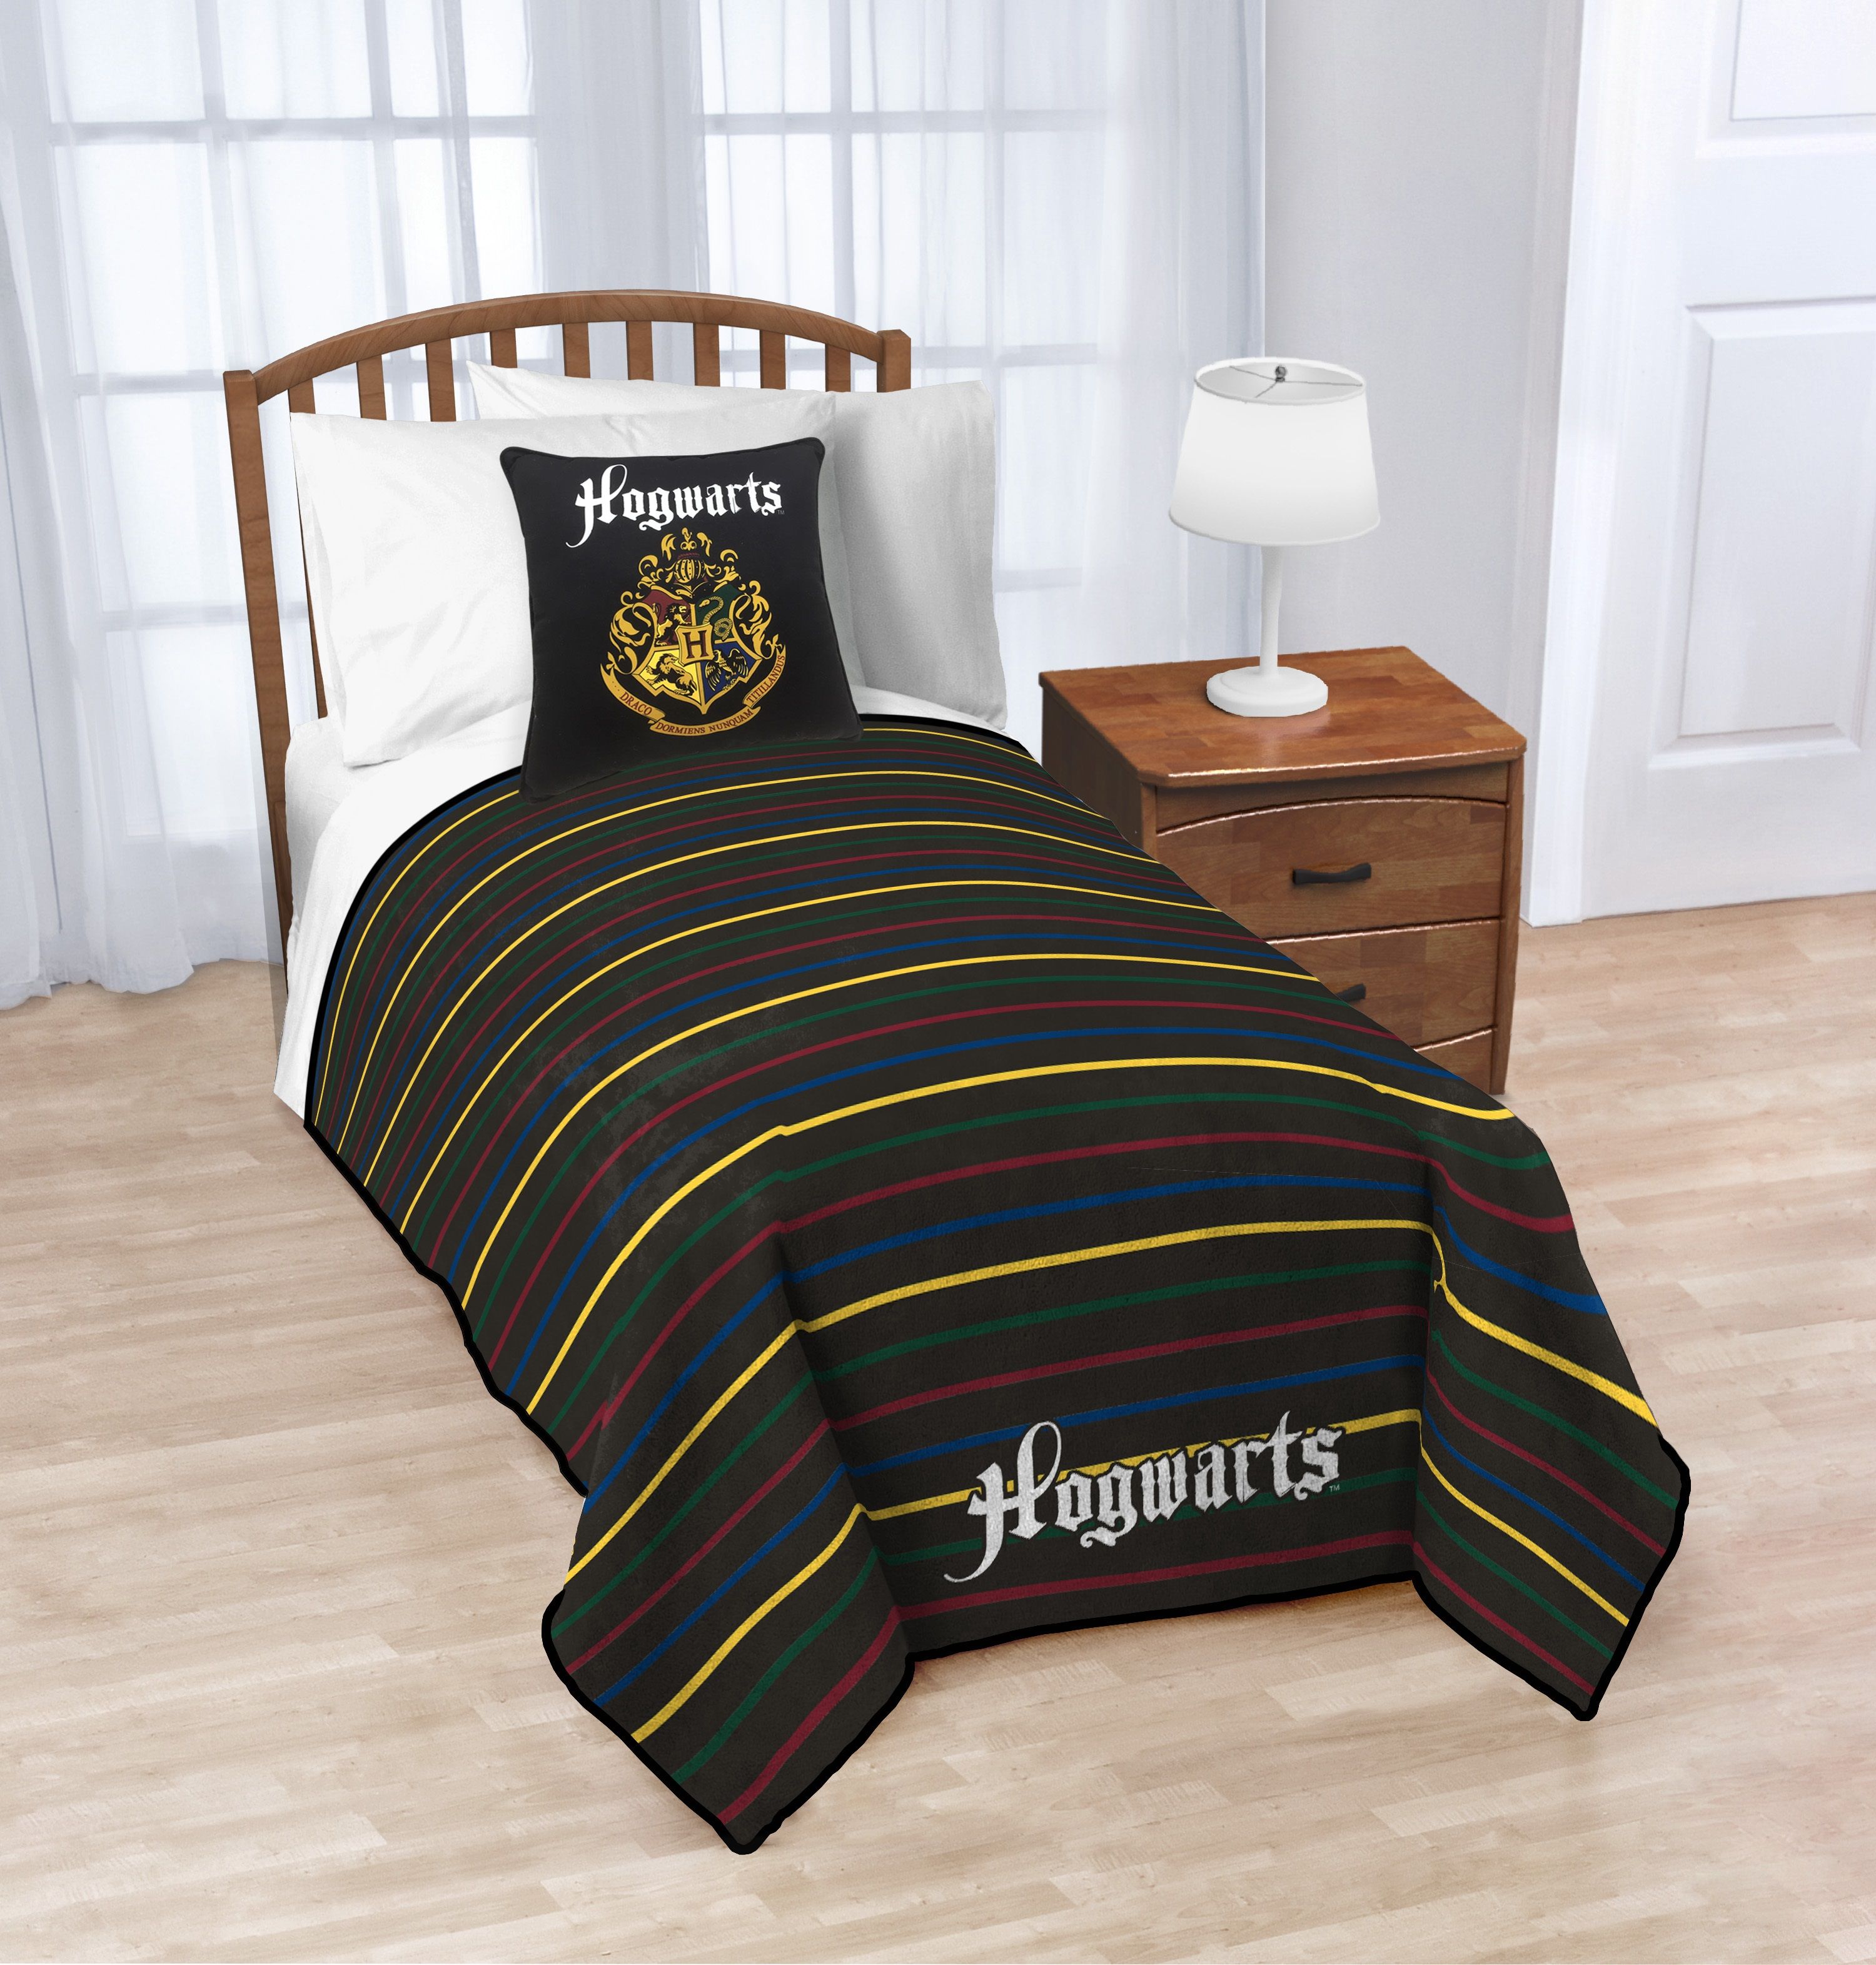 Harry Potter 'Hogwarts' 2 Piece Decorative Pillow and Blanket Set - image 2 of 5